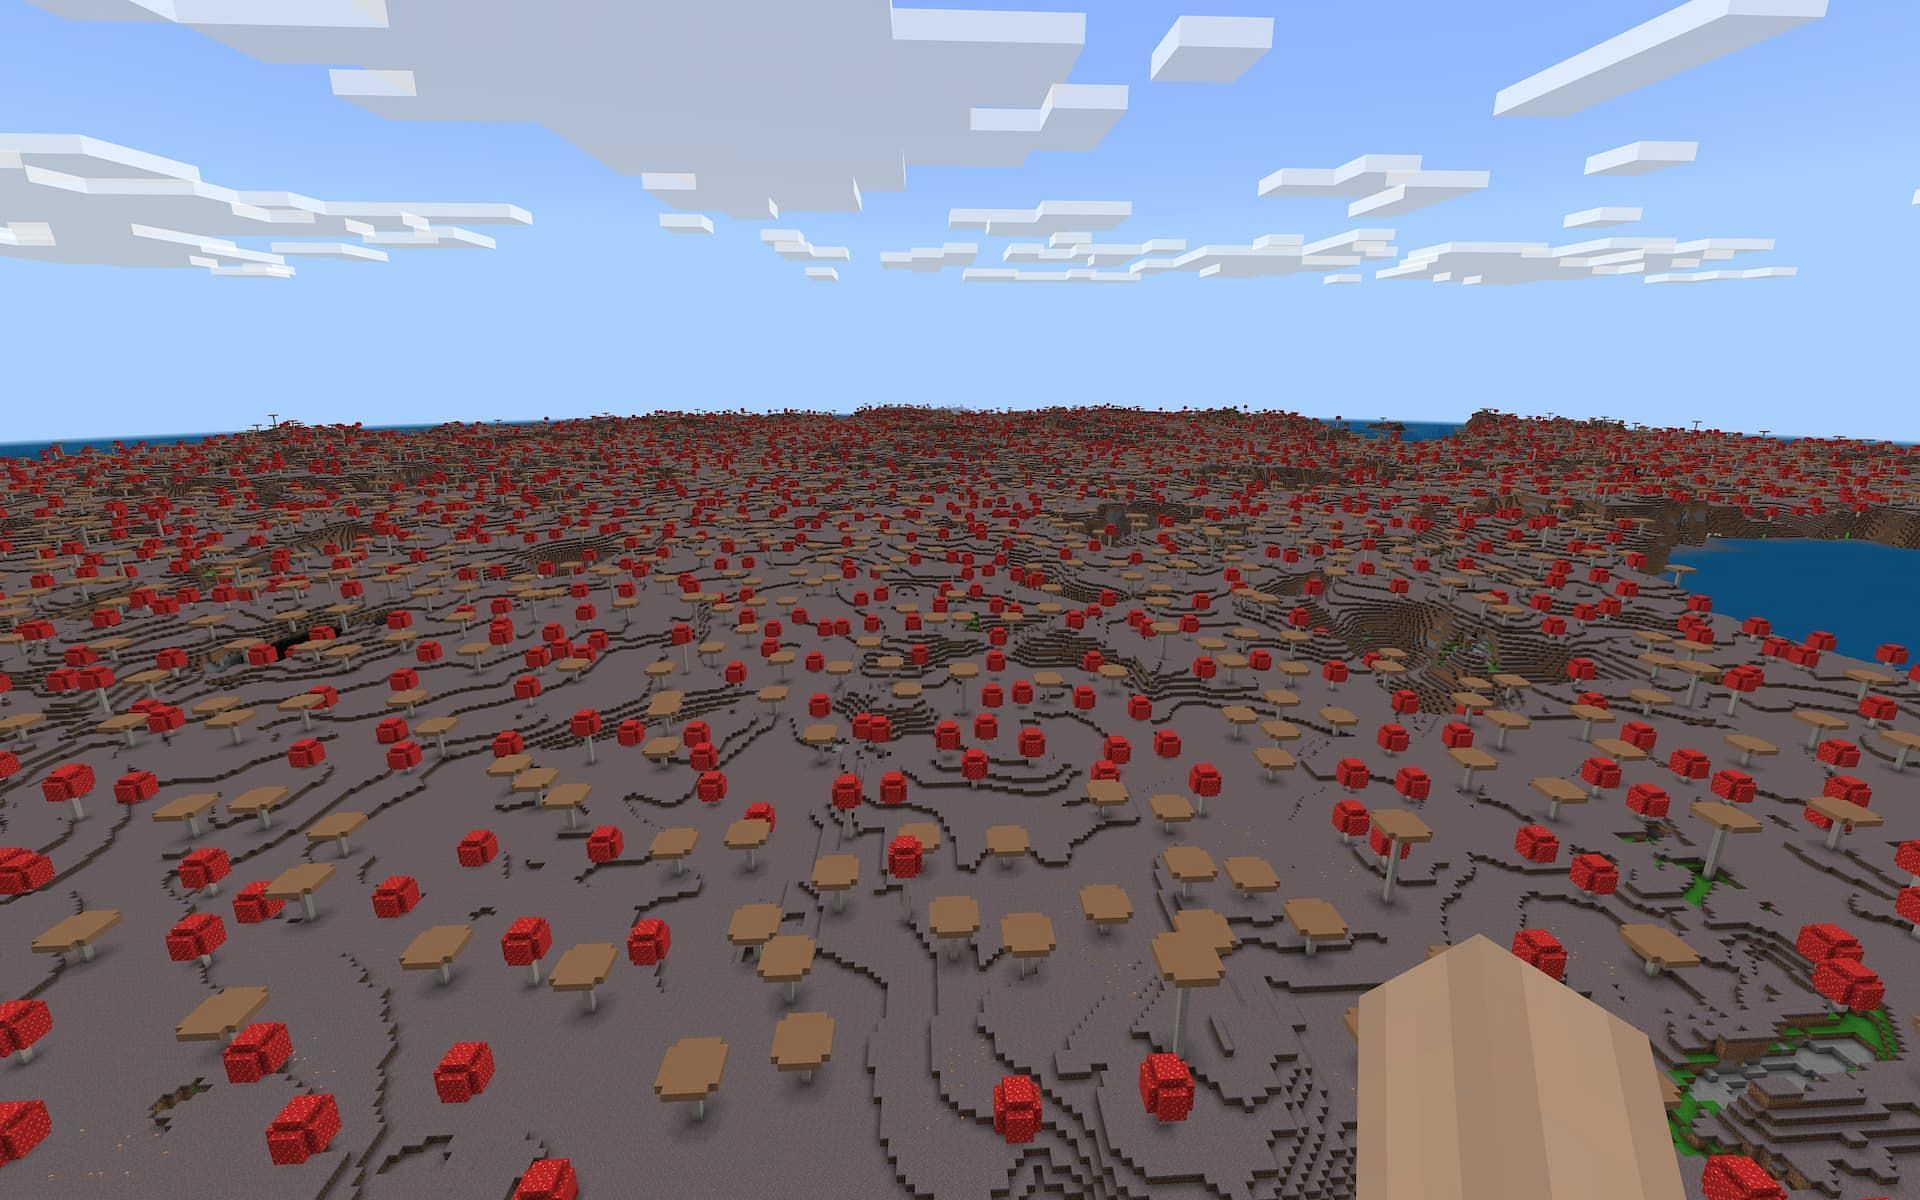 Mushrooms stretching as far as the eye can see in all directions (Image via Mojang)